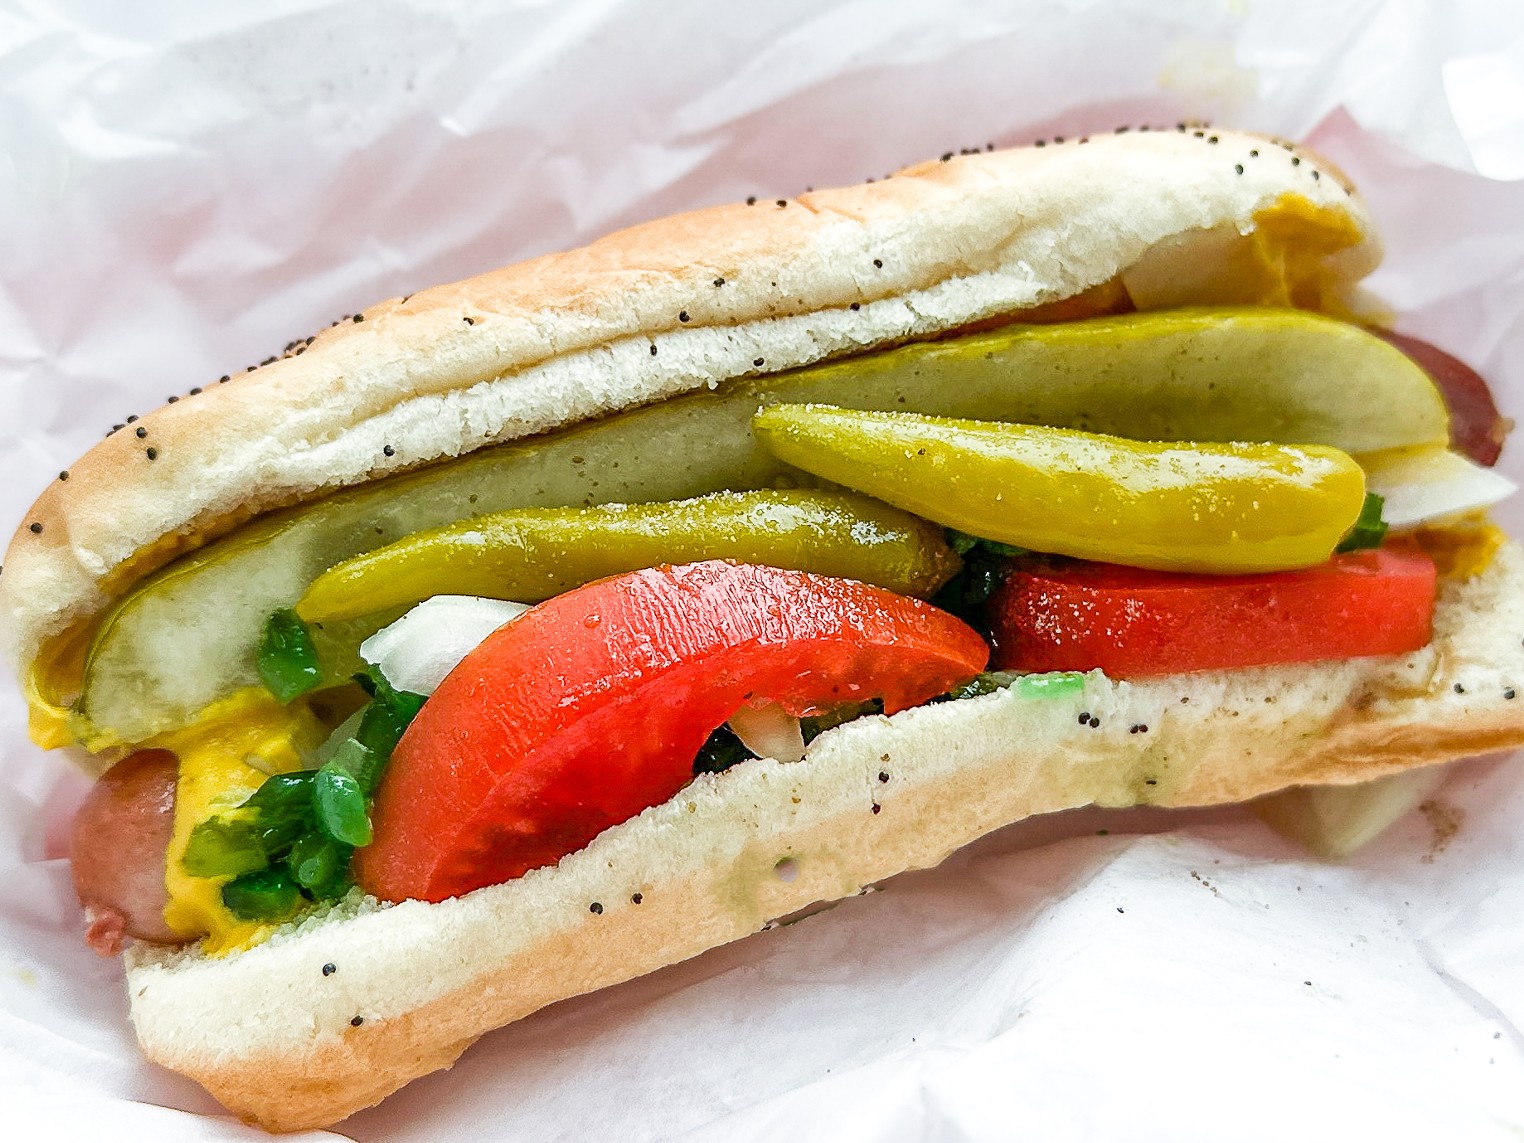 First Look: Chicago Style Dog’s, The Newest Player in the Chicago Grub Food Scene